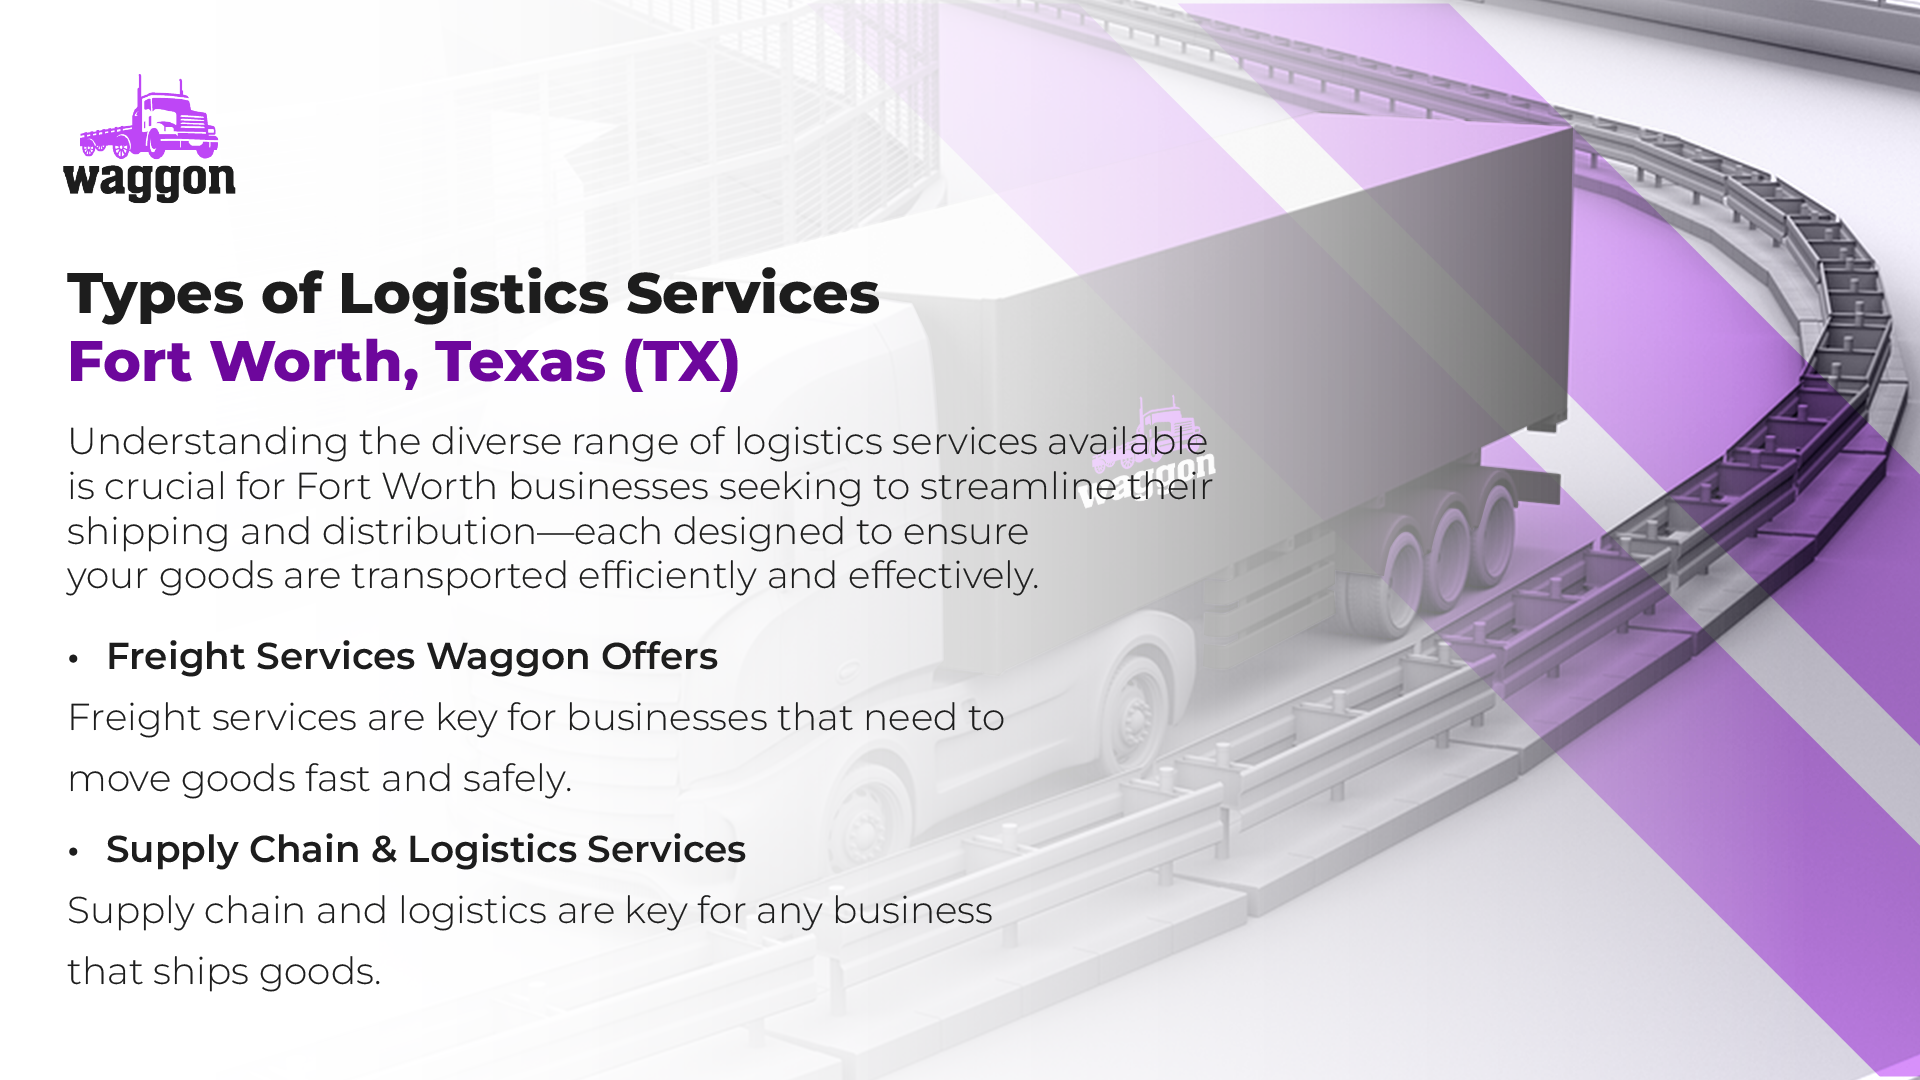 Types of Logistics Services in Fort Worth, Texas (TX)